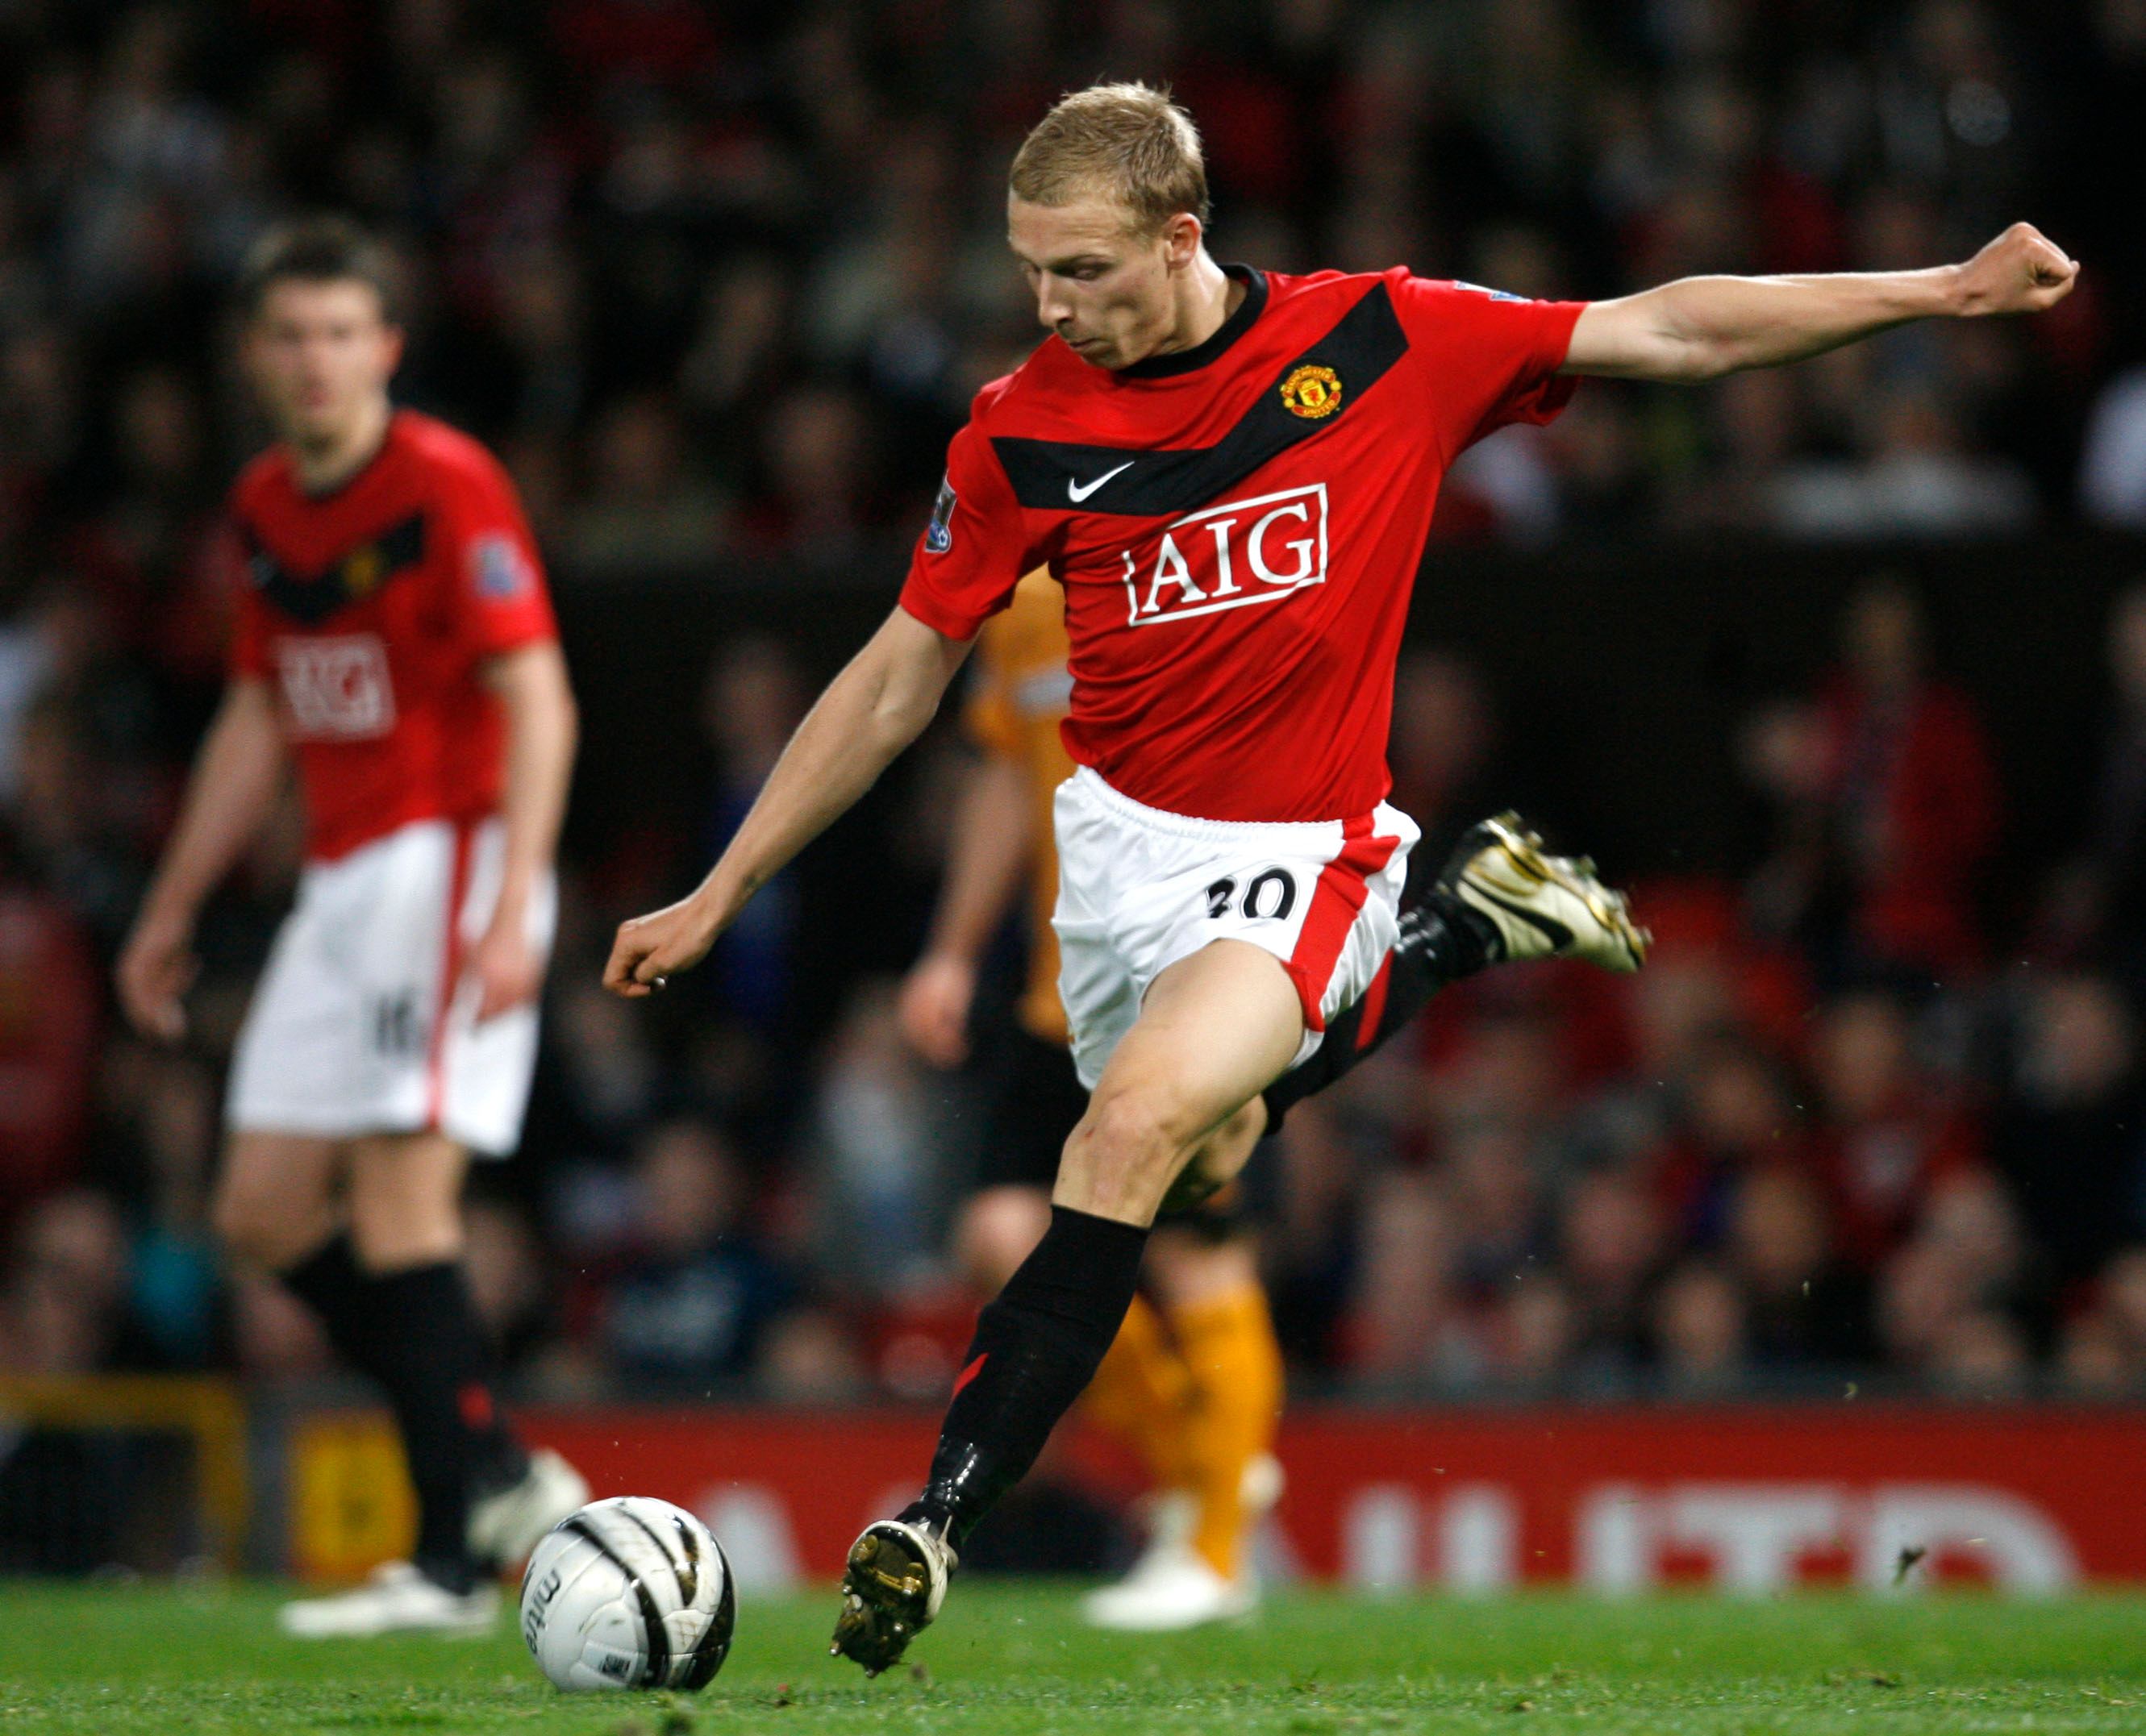 23/9/09 Ritchie de Laet - Manchester United vs Wolverhampton Wanderers Carling Cup.